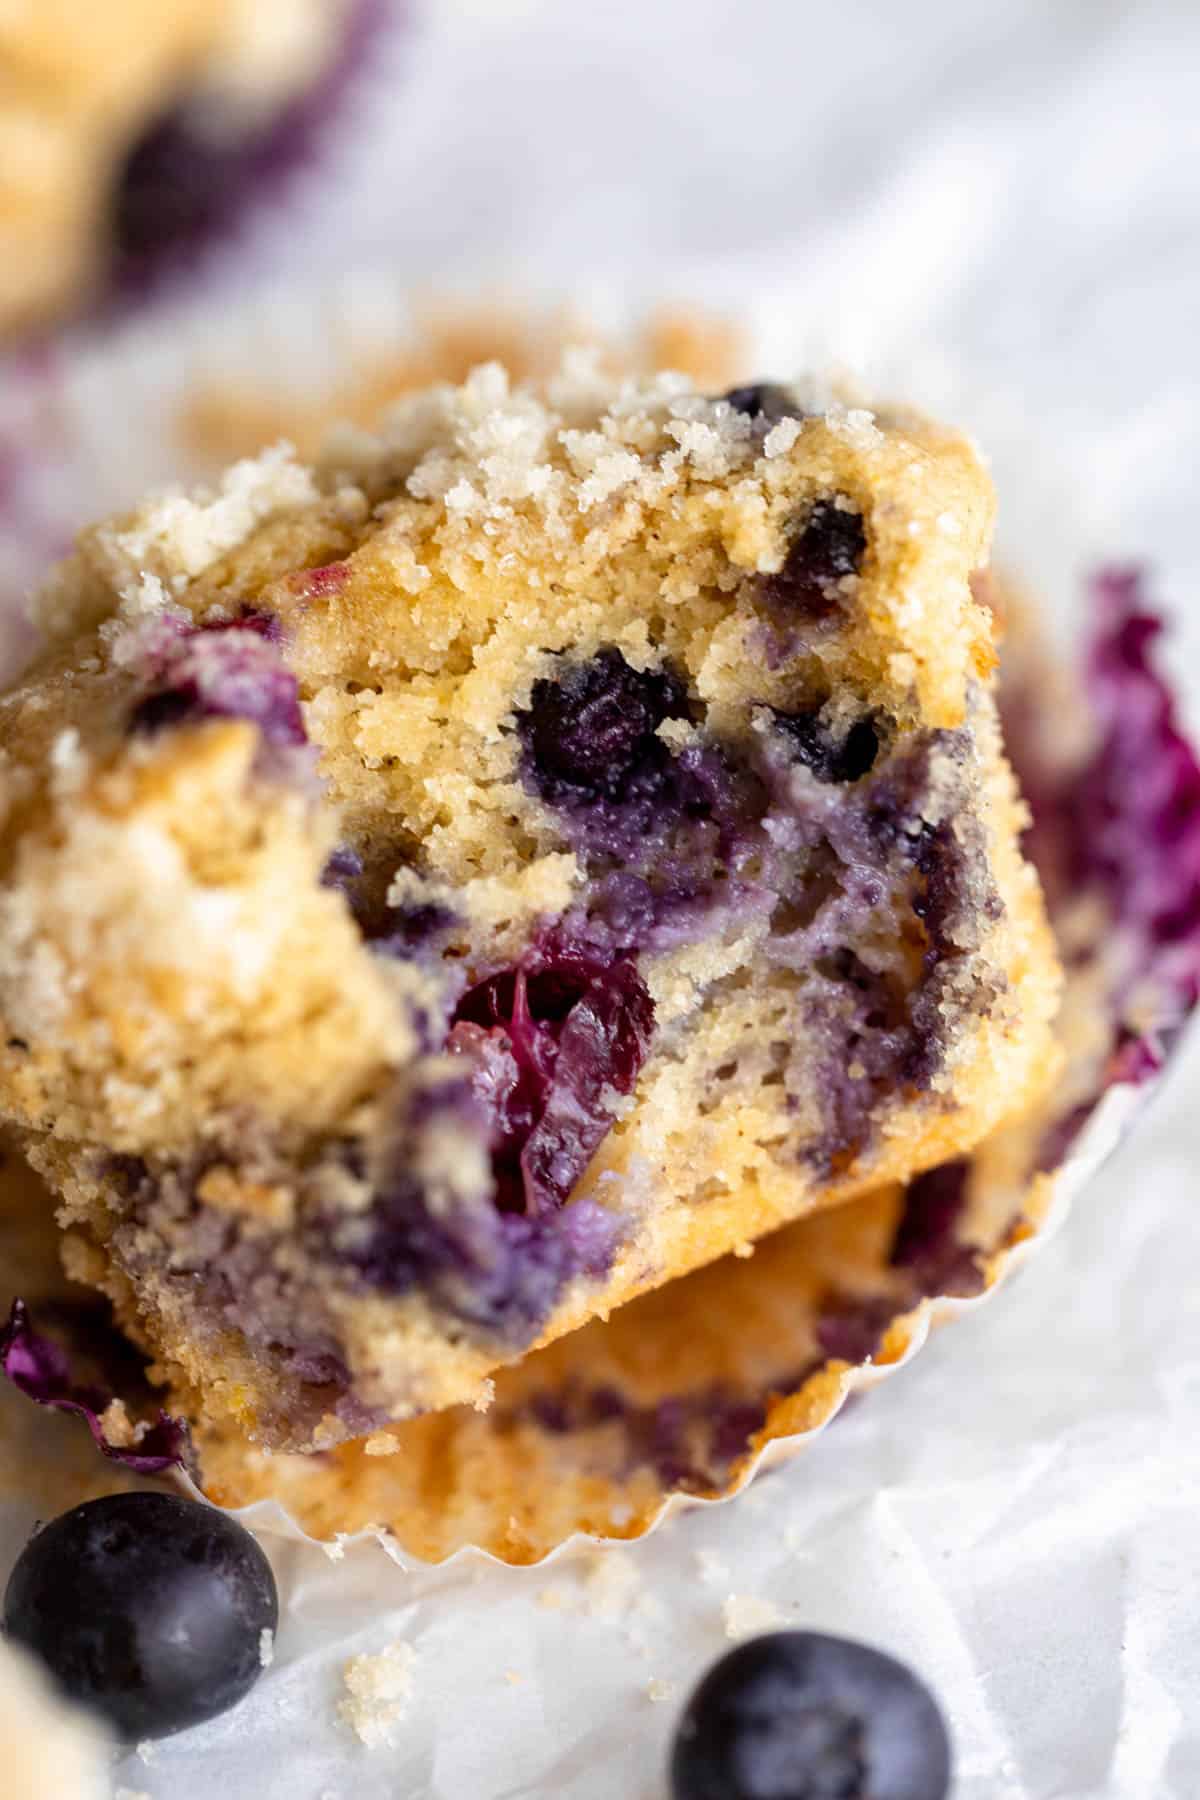 Blueberry muffin on the side.